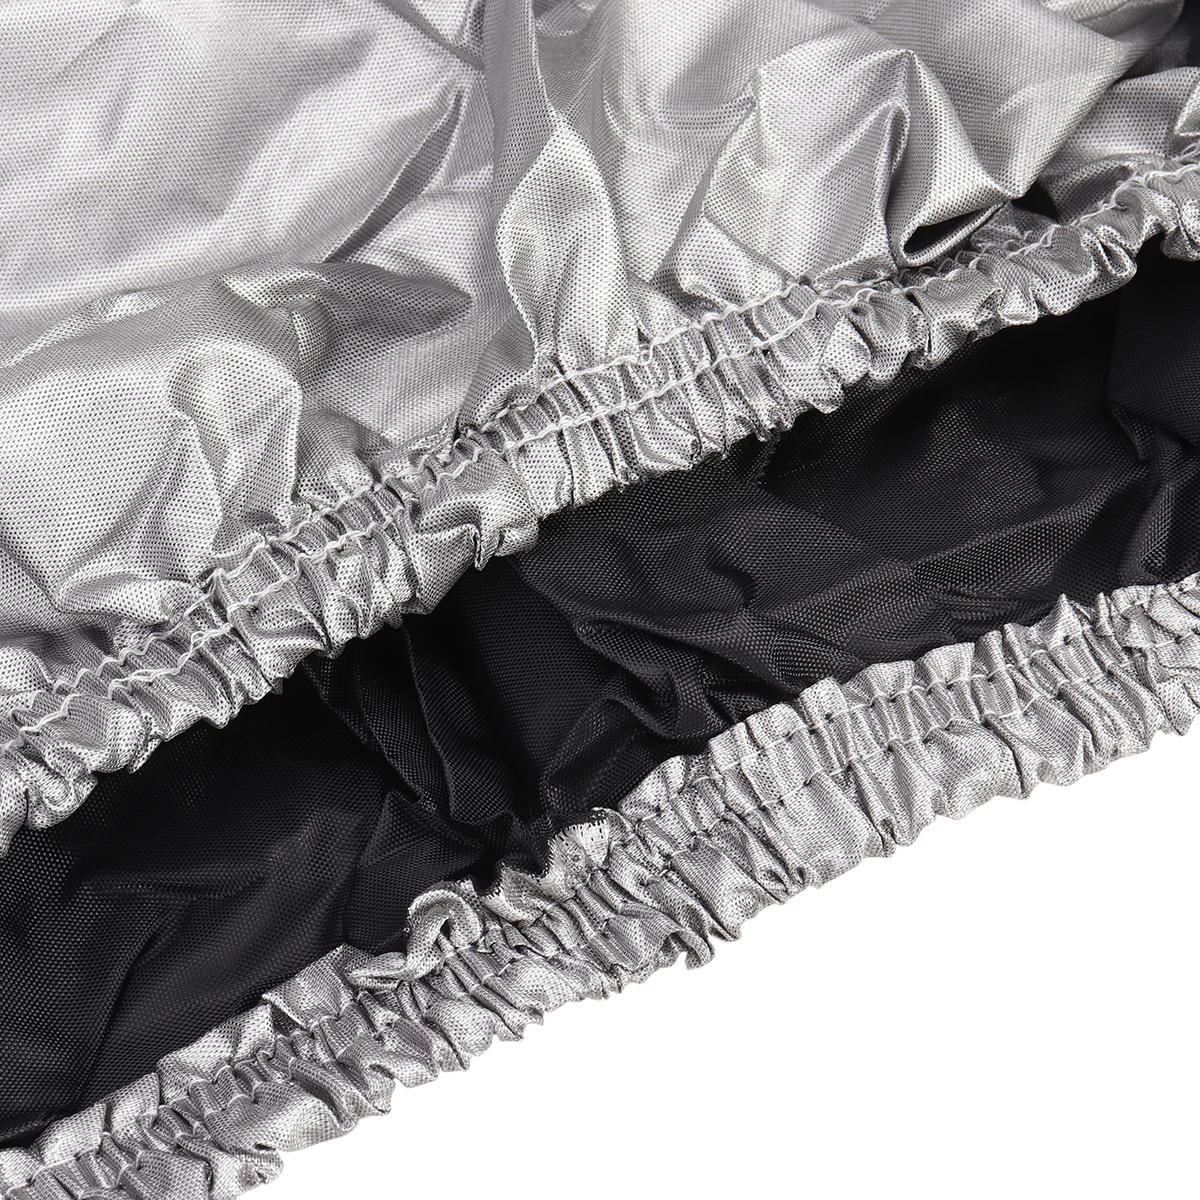 12Ft / 14Ft / 16Ft / 18Ft Jon Boat Cover 210D Waterproof Sun Protection Silver